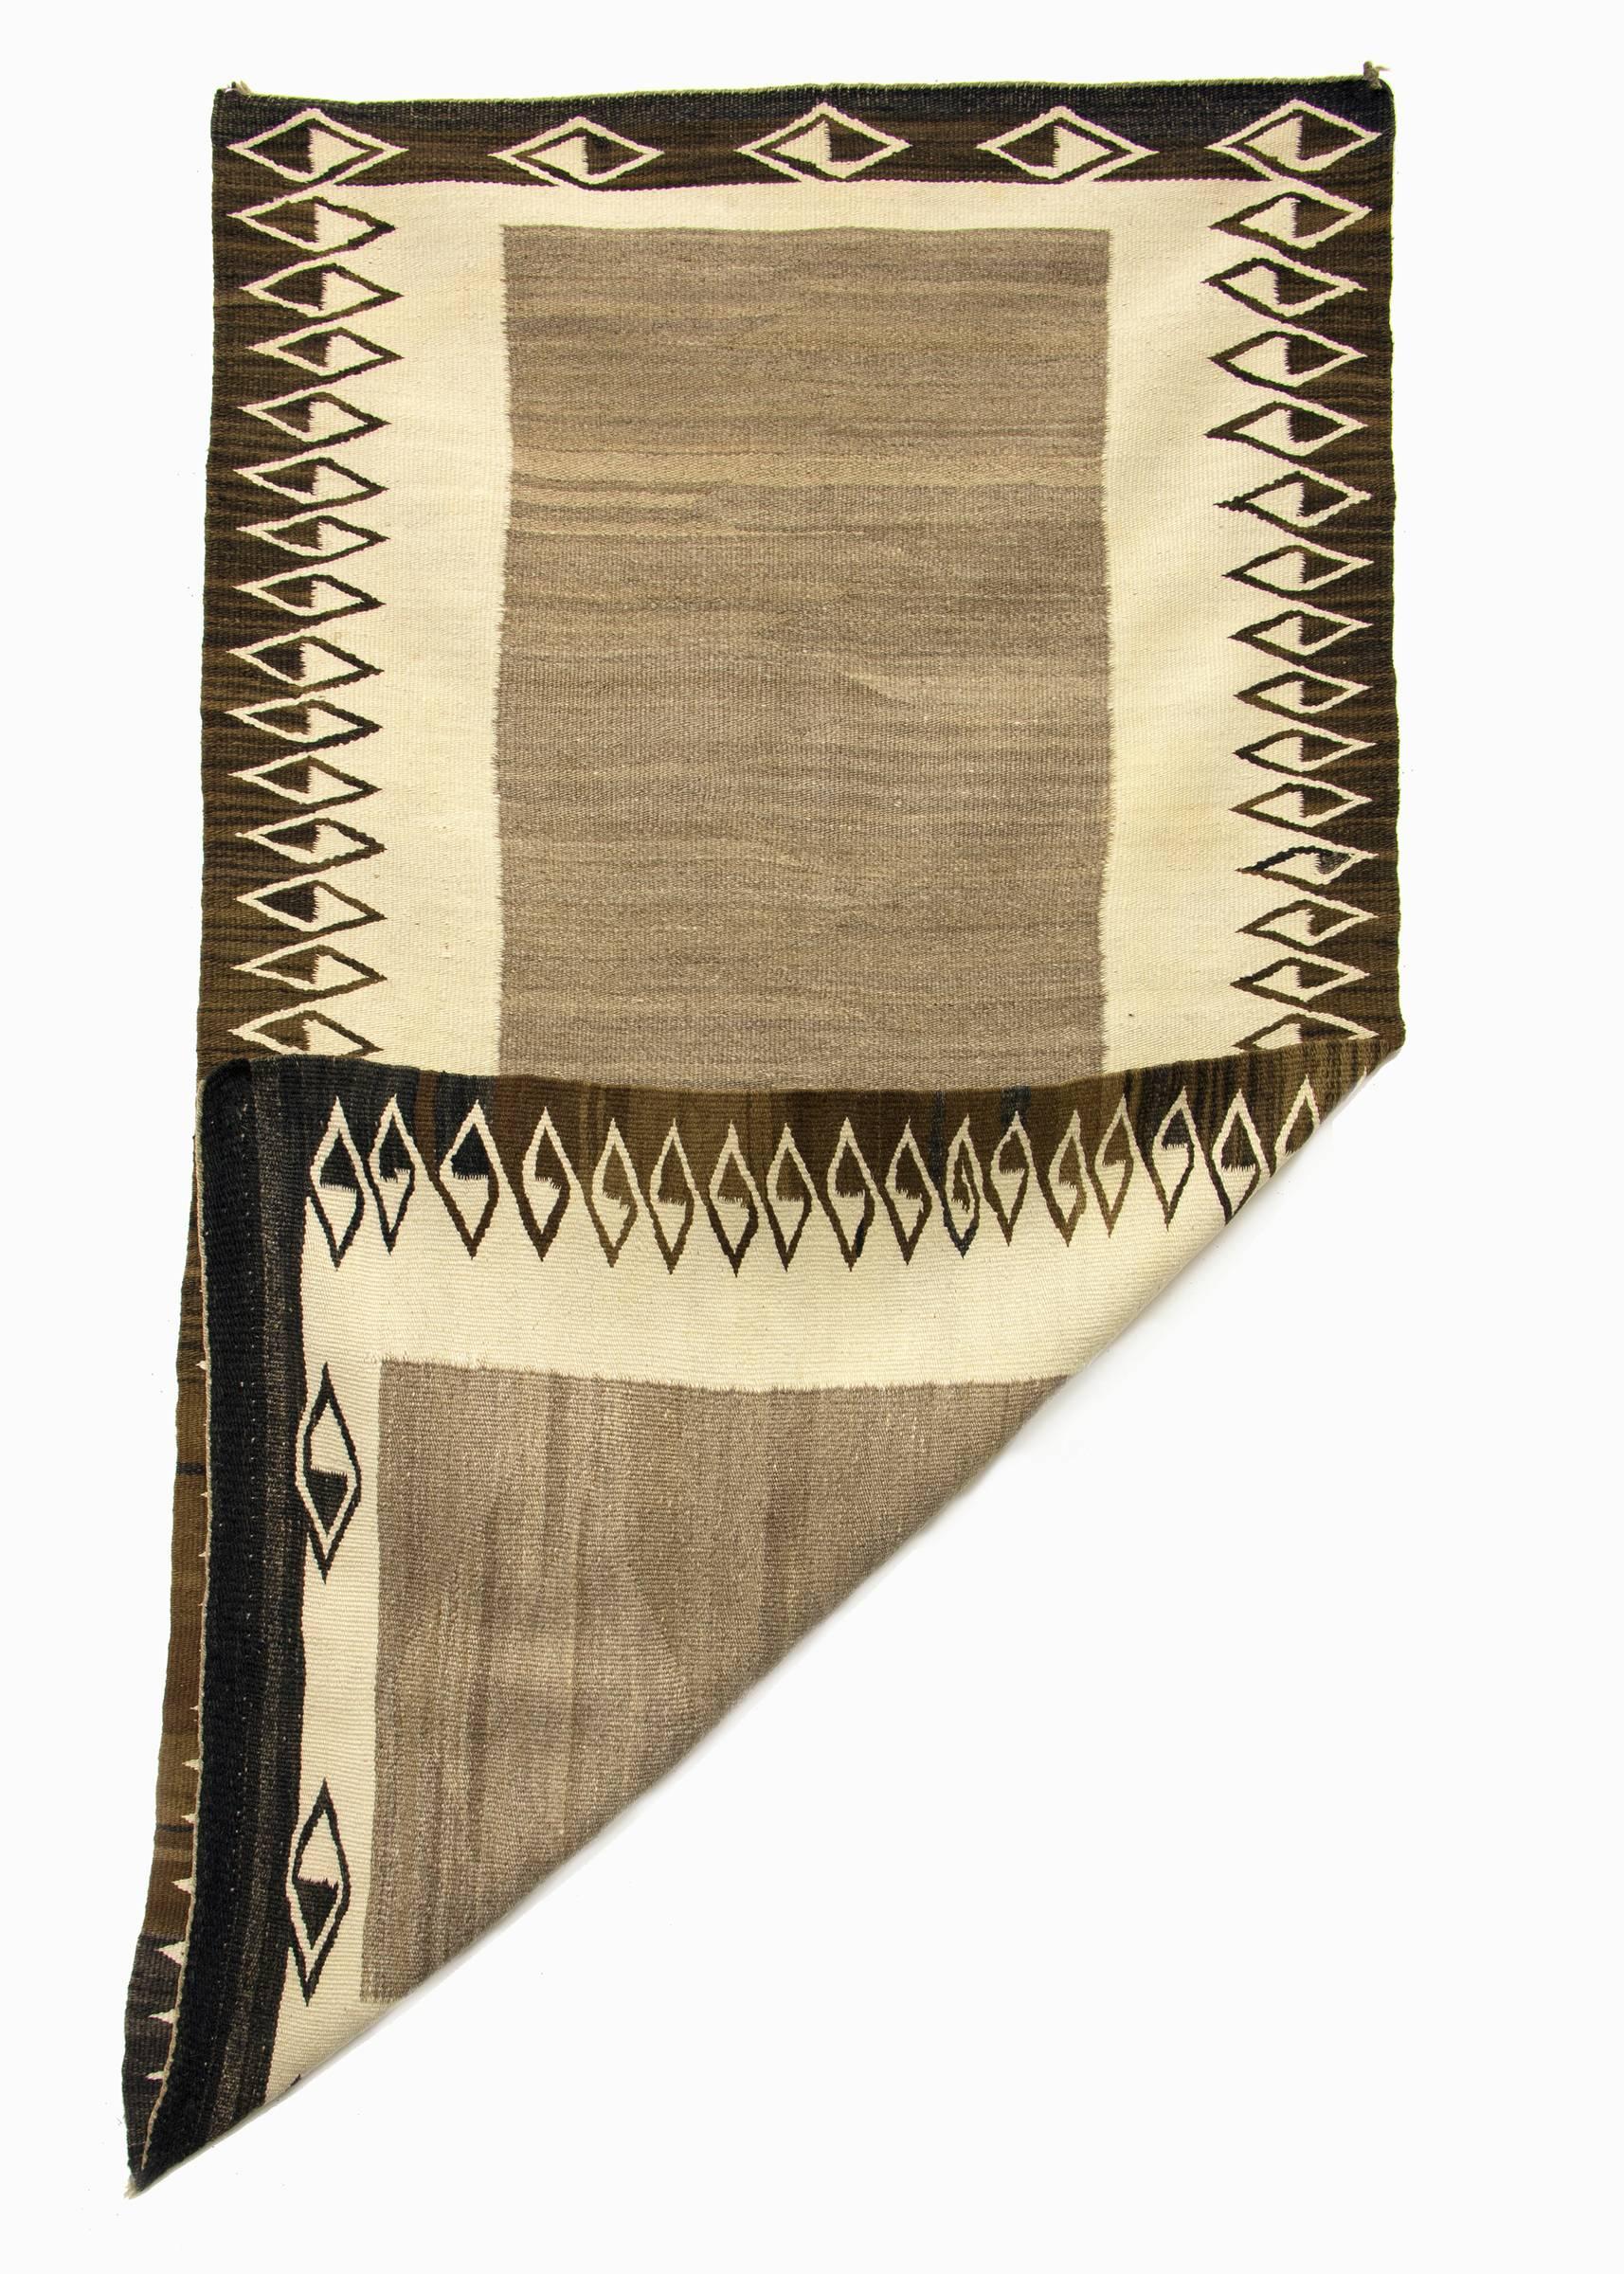 Vintage antique Navajo rug/saddle blanket circa 1900. Woven in a double saddle blanket format of native hand-spun wool in natural fleece colors of ivory, gray and brown/black.
This textile is well suited for use on the floor as an area rug or as a